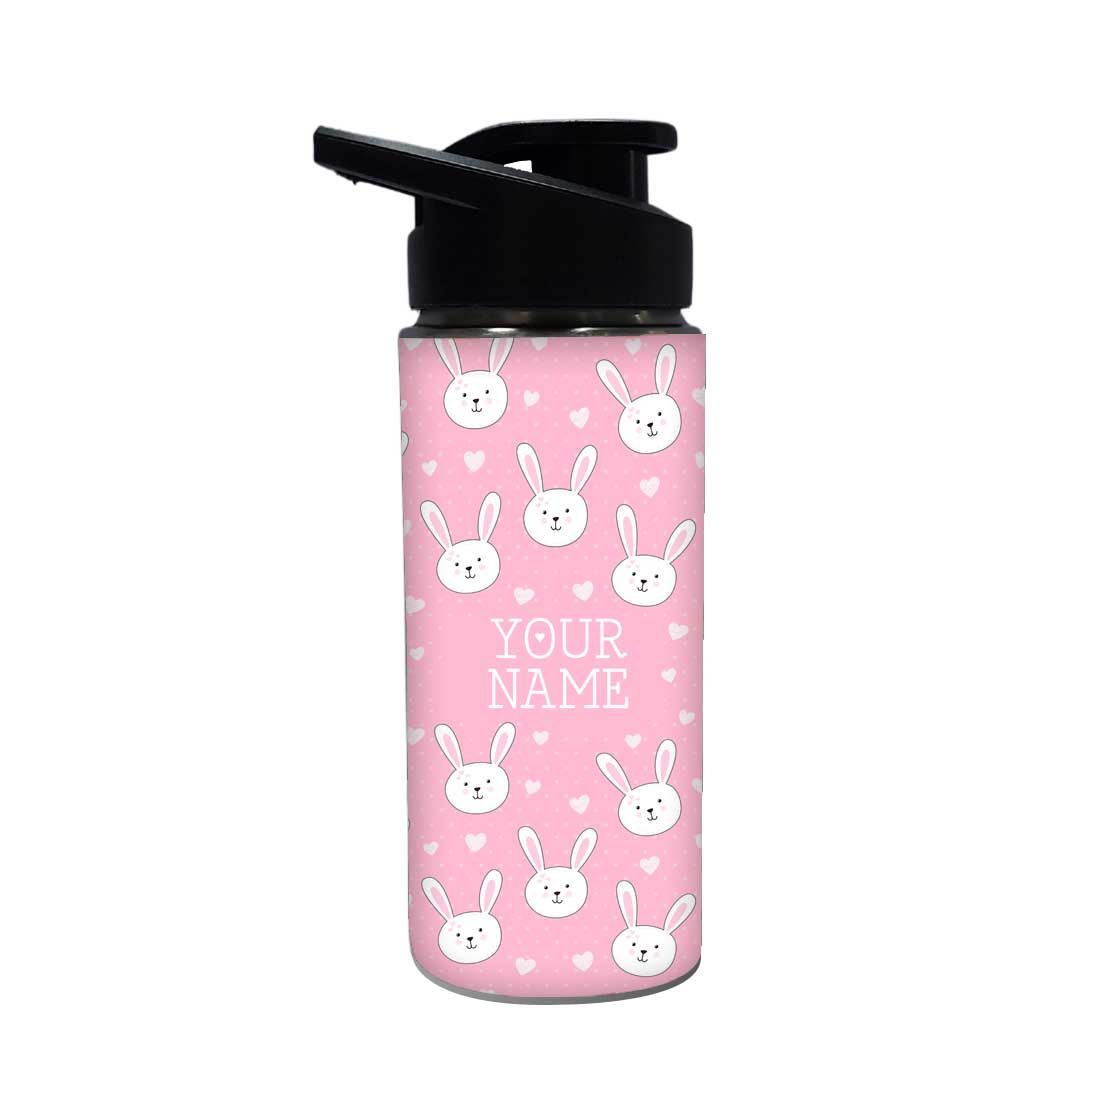 Personalized Bottle With Name - White Rabbit Nutcase